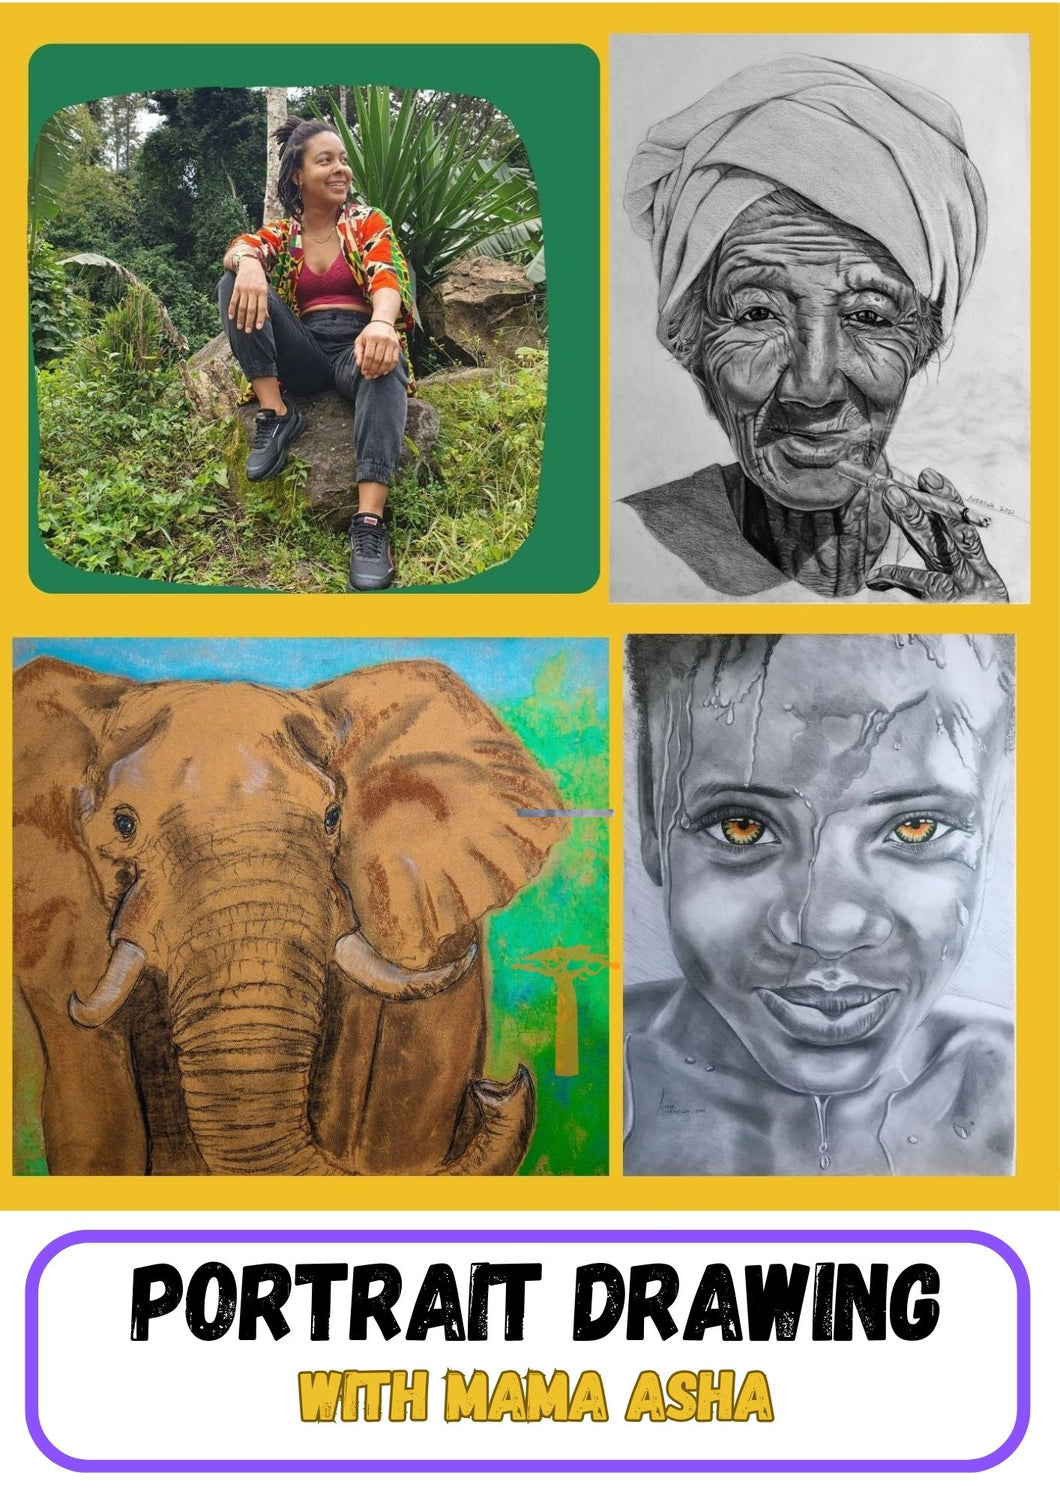 Online African Art Course for 11-16 years